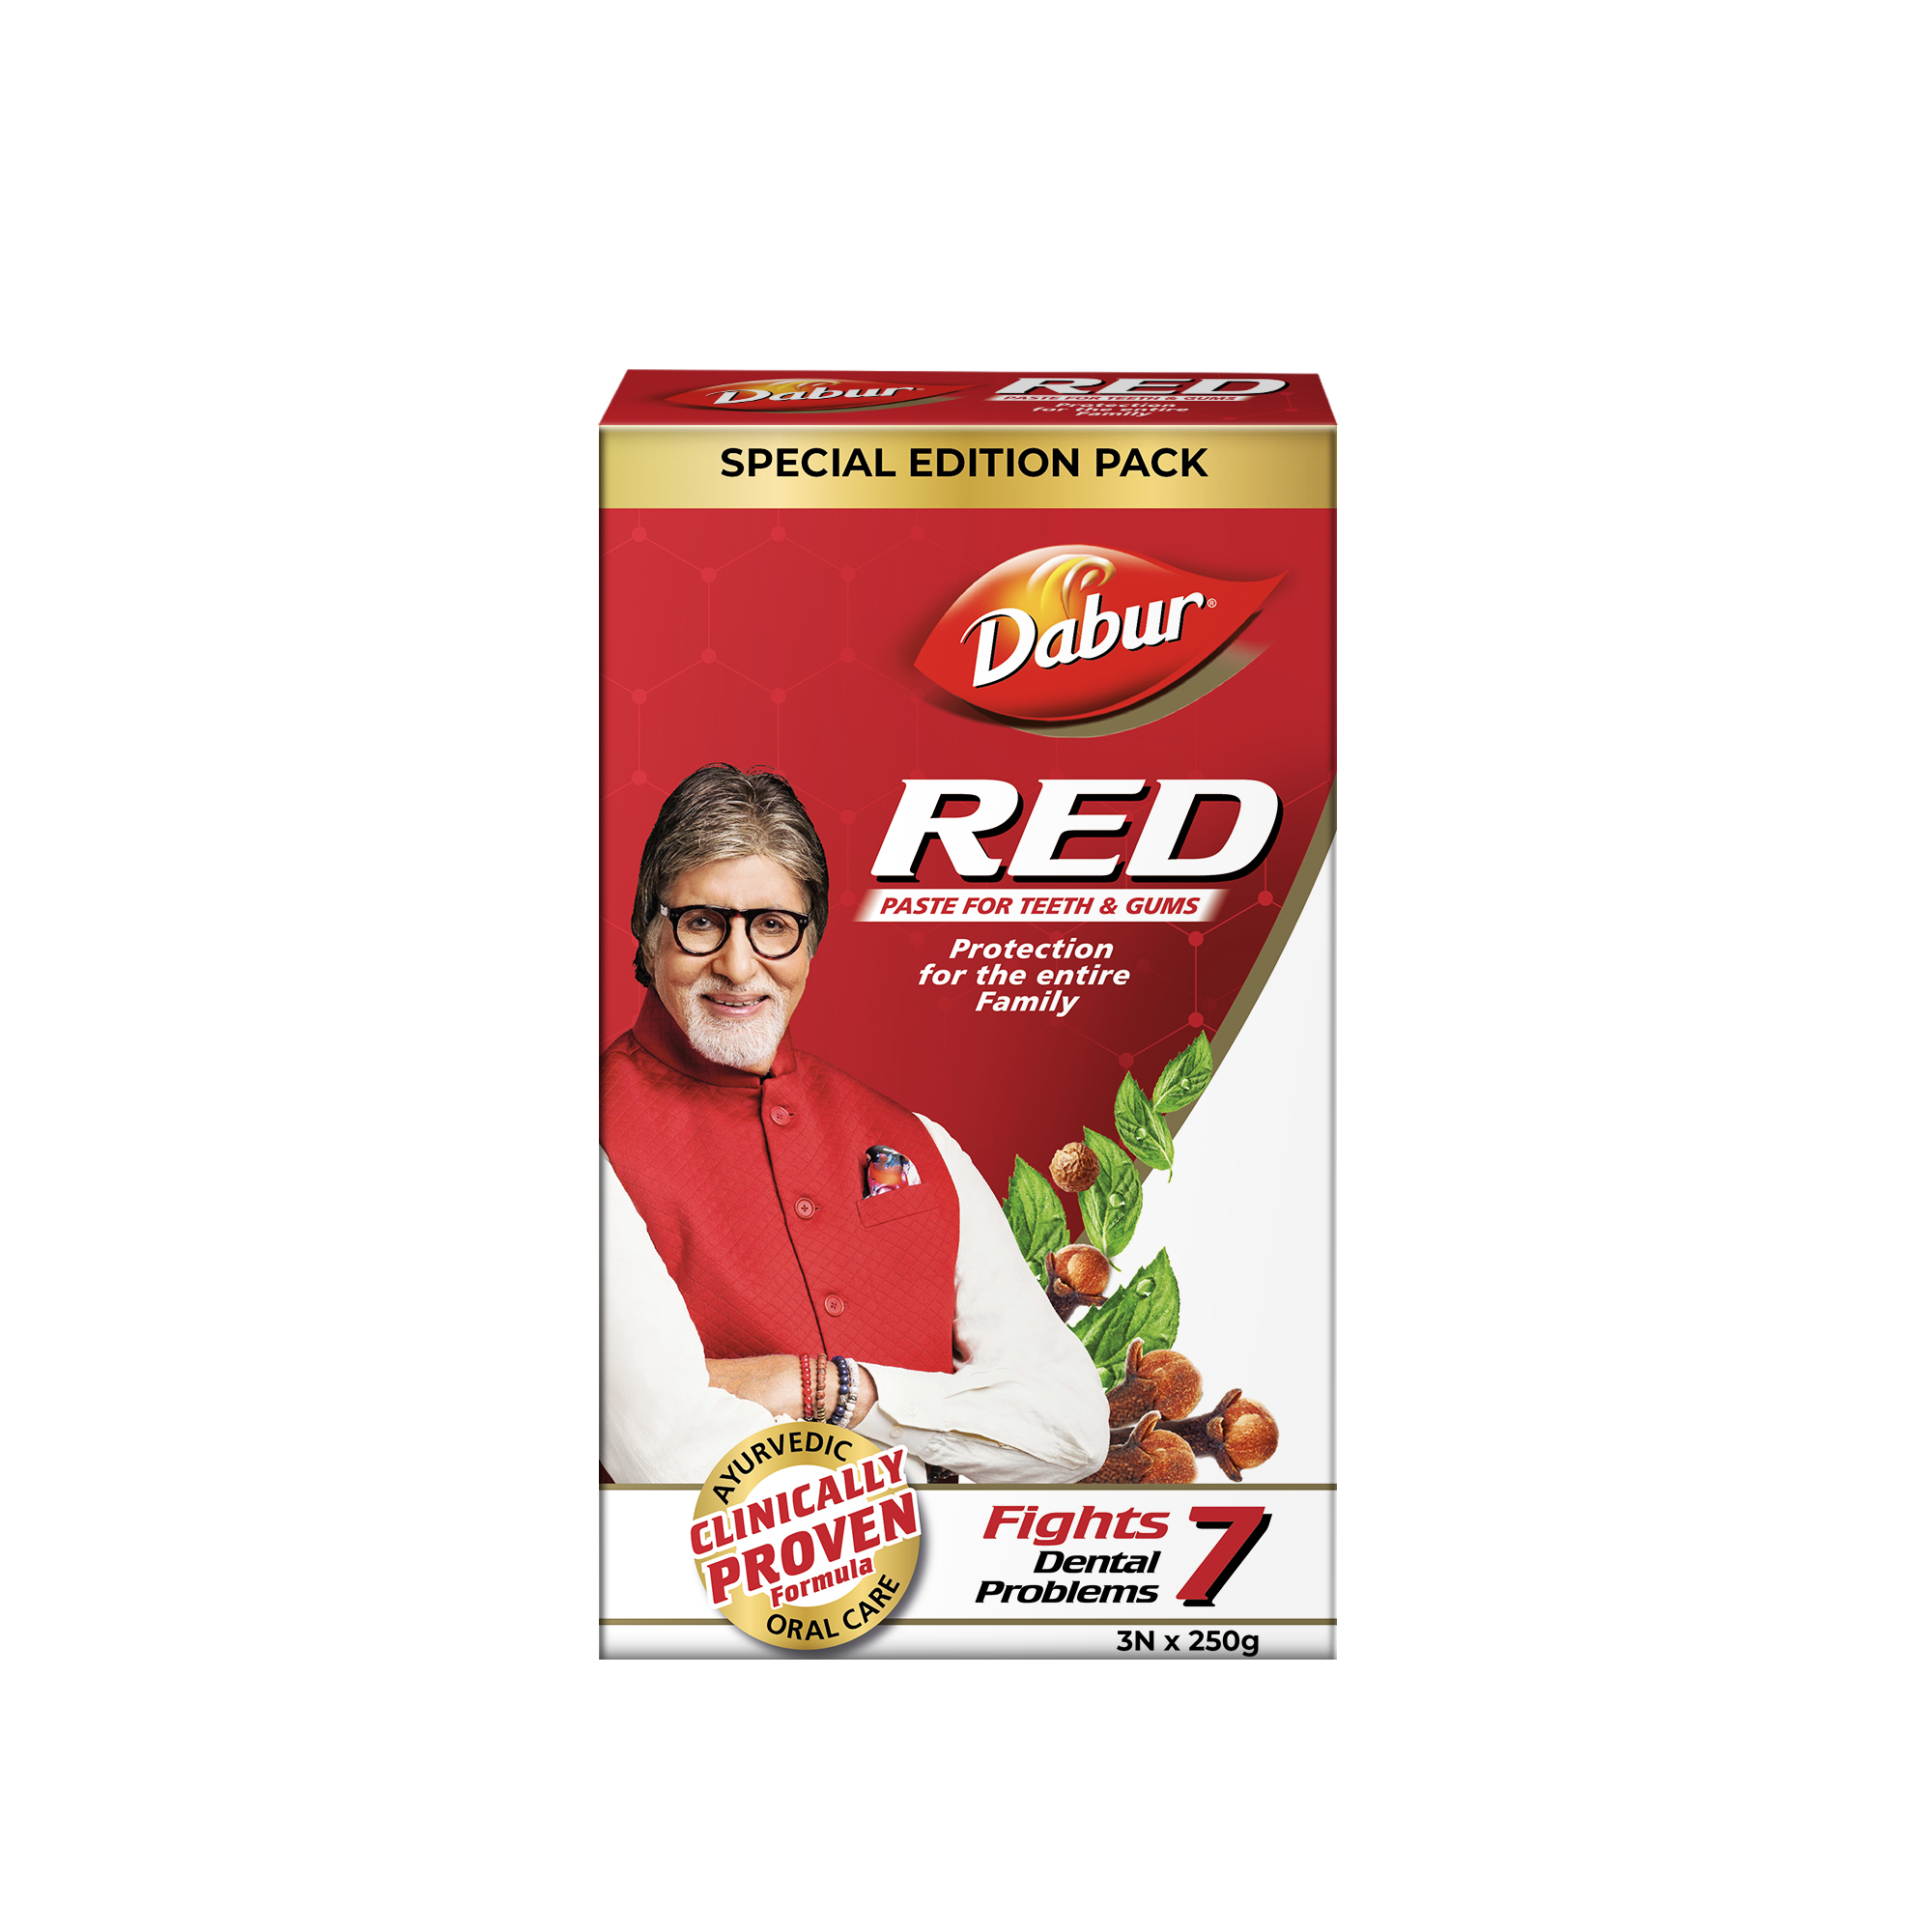 Dabur Red Paste Unveils Exclusive Pack for a Bright Smile this Festive Season